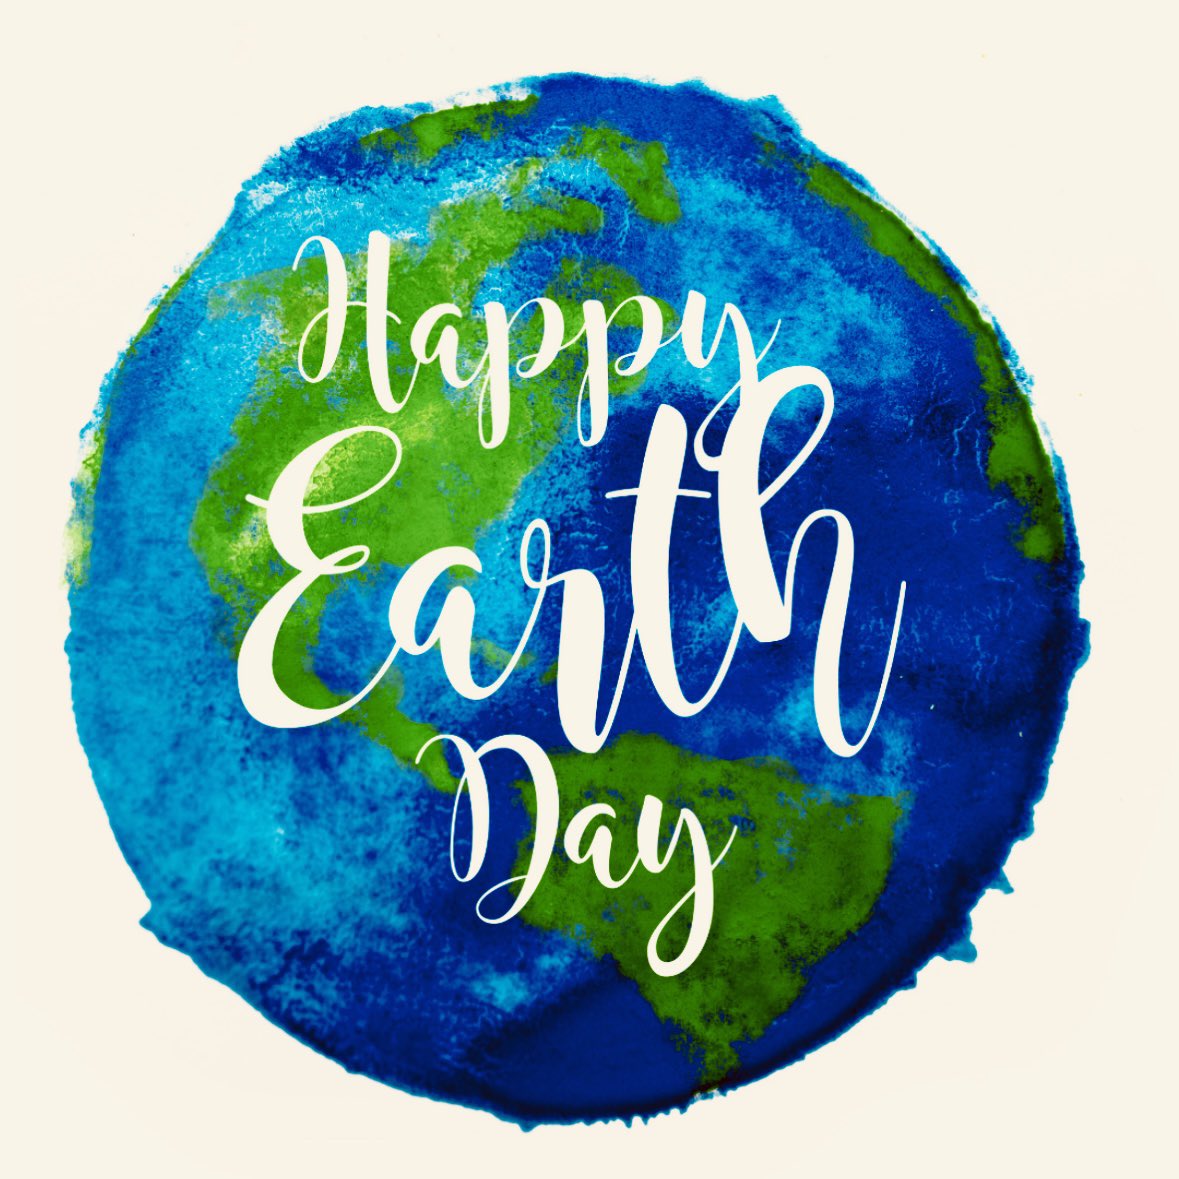 Let’s honour our incredible planet today and every day. Together, we can make a positive impact and ensure a sustainable future for generations to come. Happy Earth Day! #EarthDay #ProtectYourMother #Sustainability